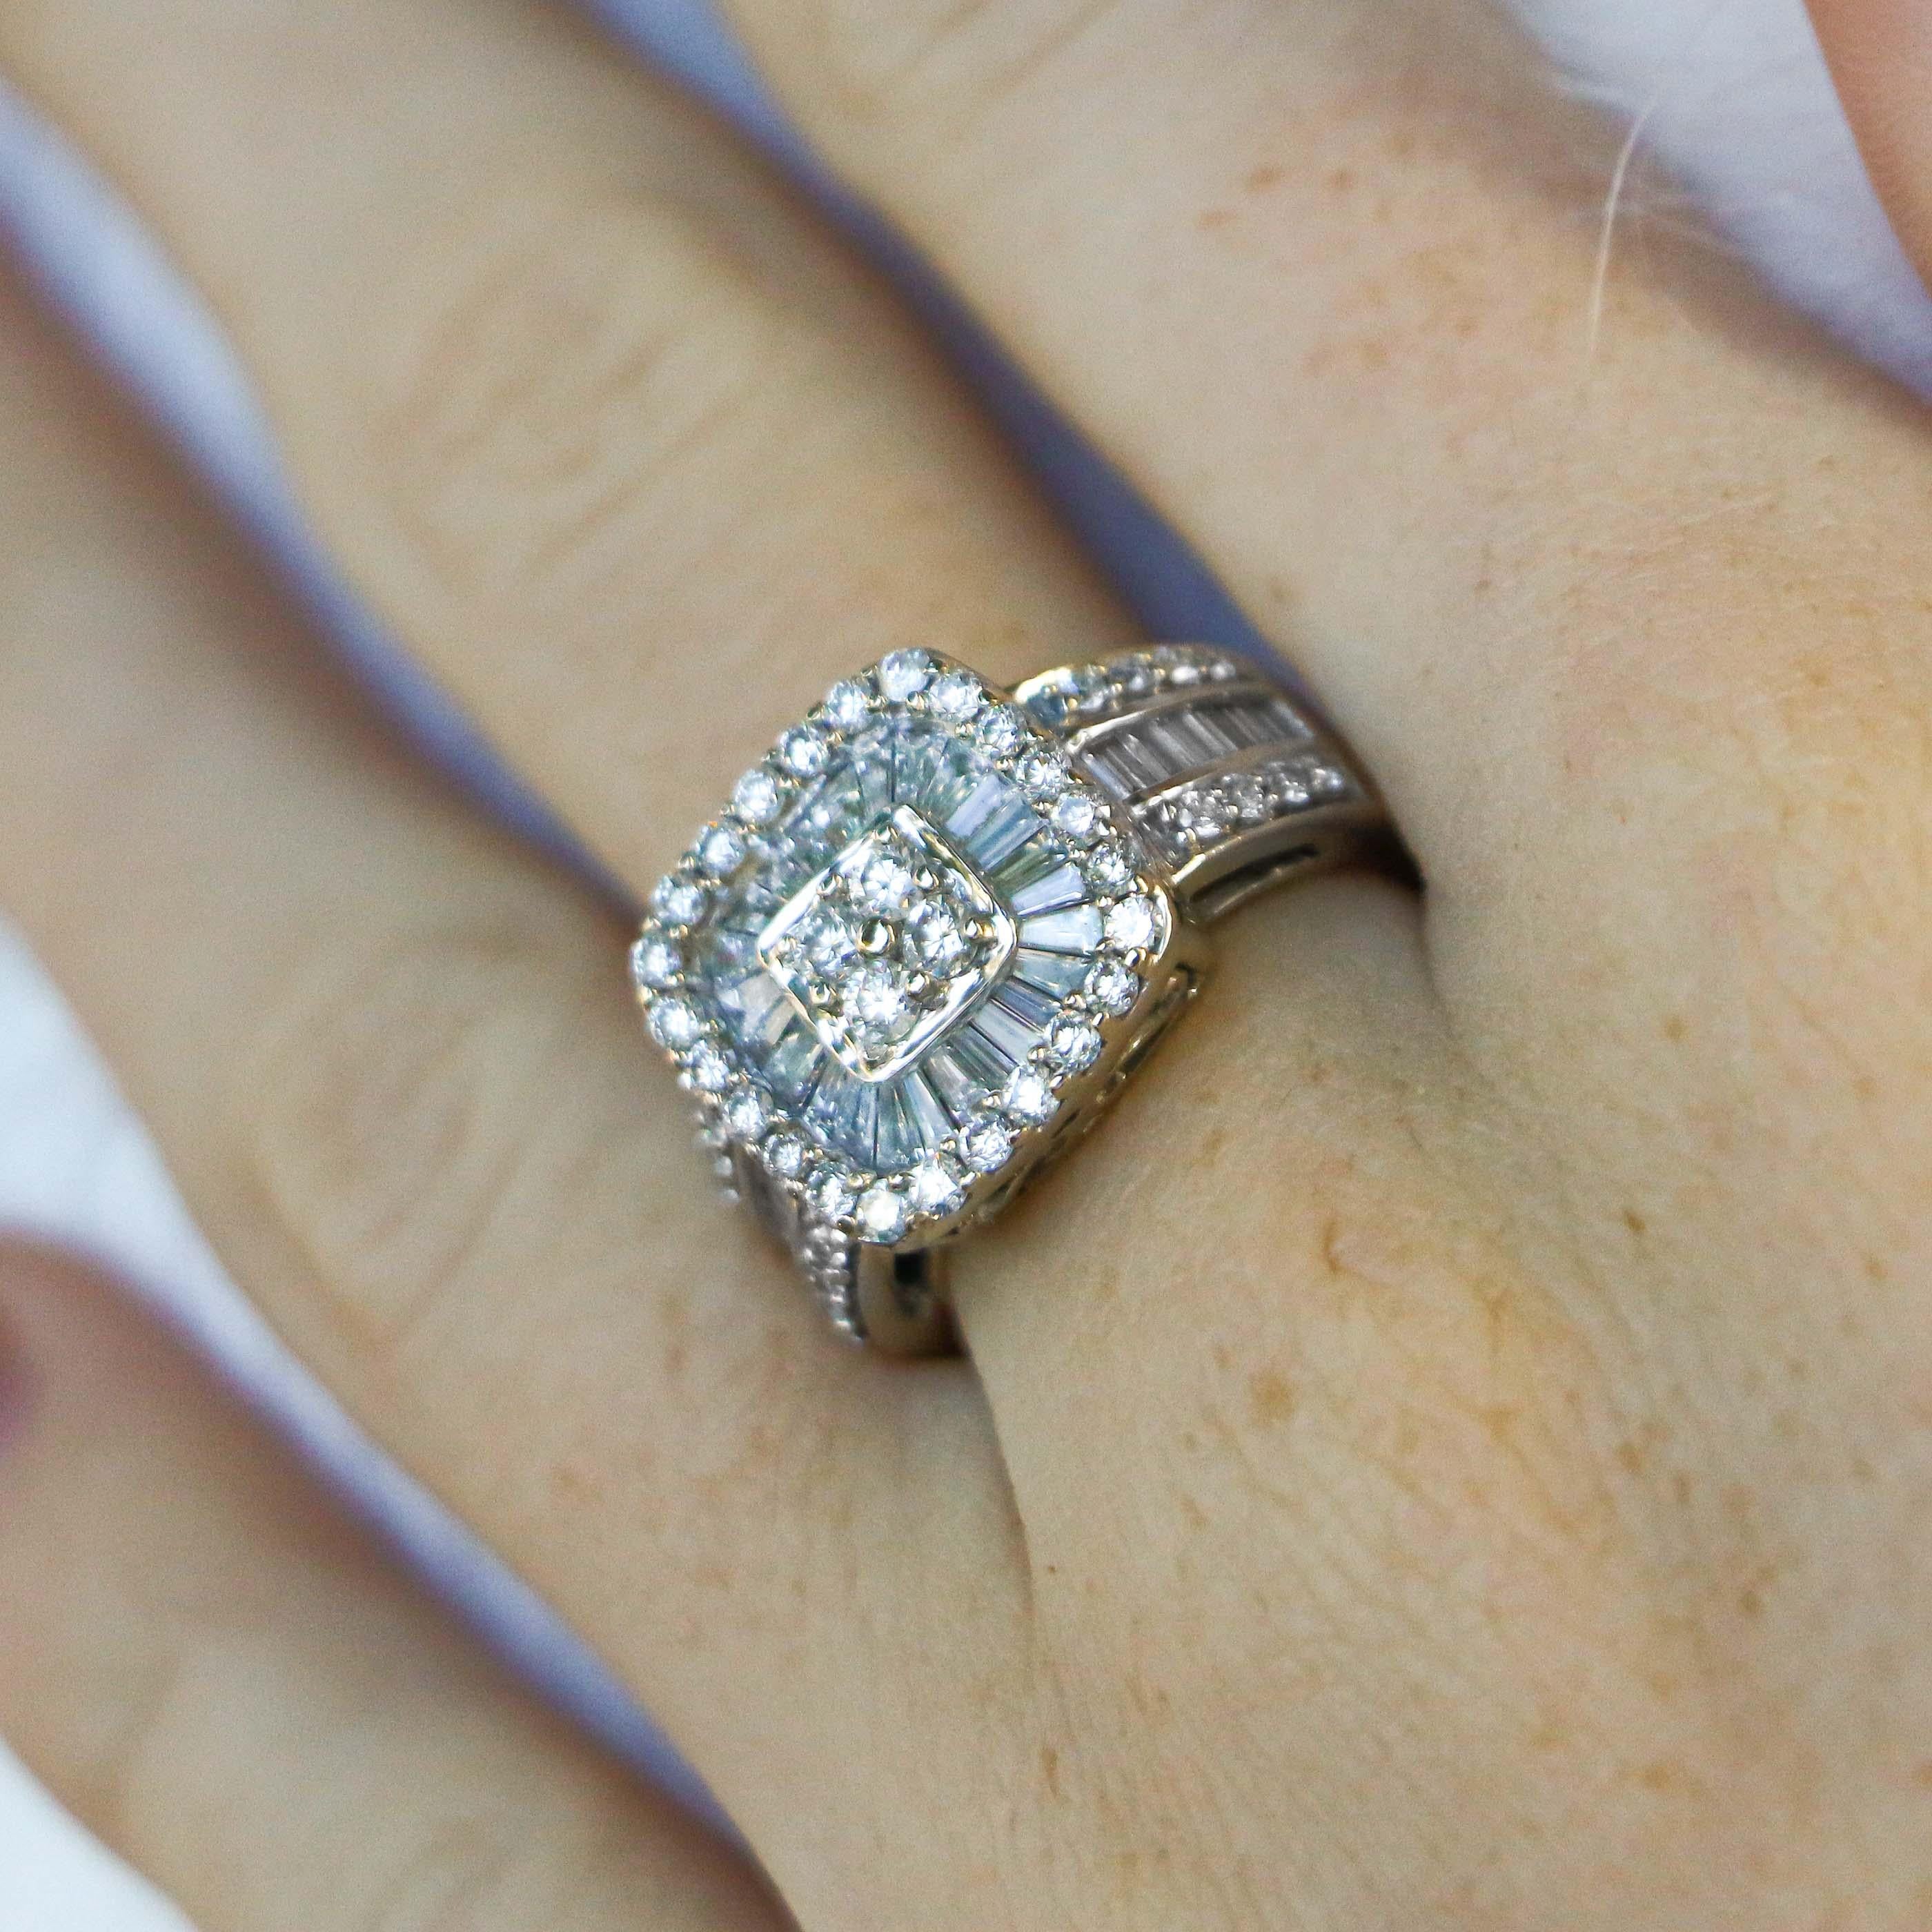 2.25 Carat Diamond Cluster Ring In Good Condition For Sale In Carlsbad, CA